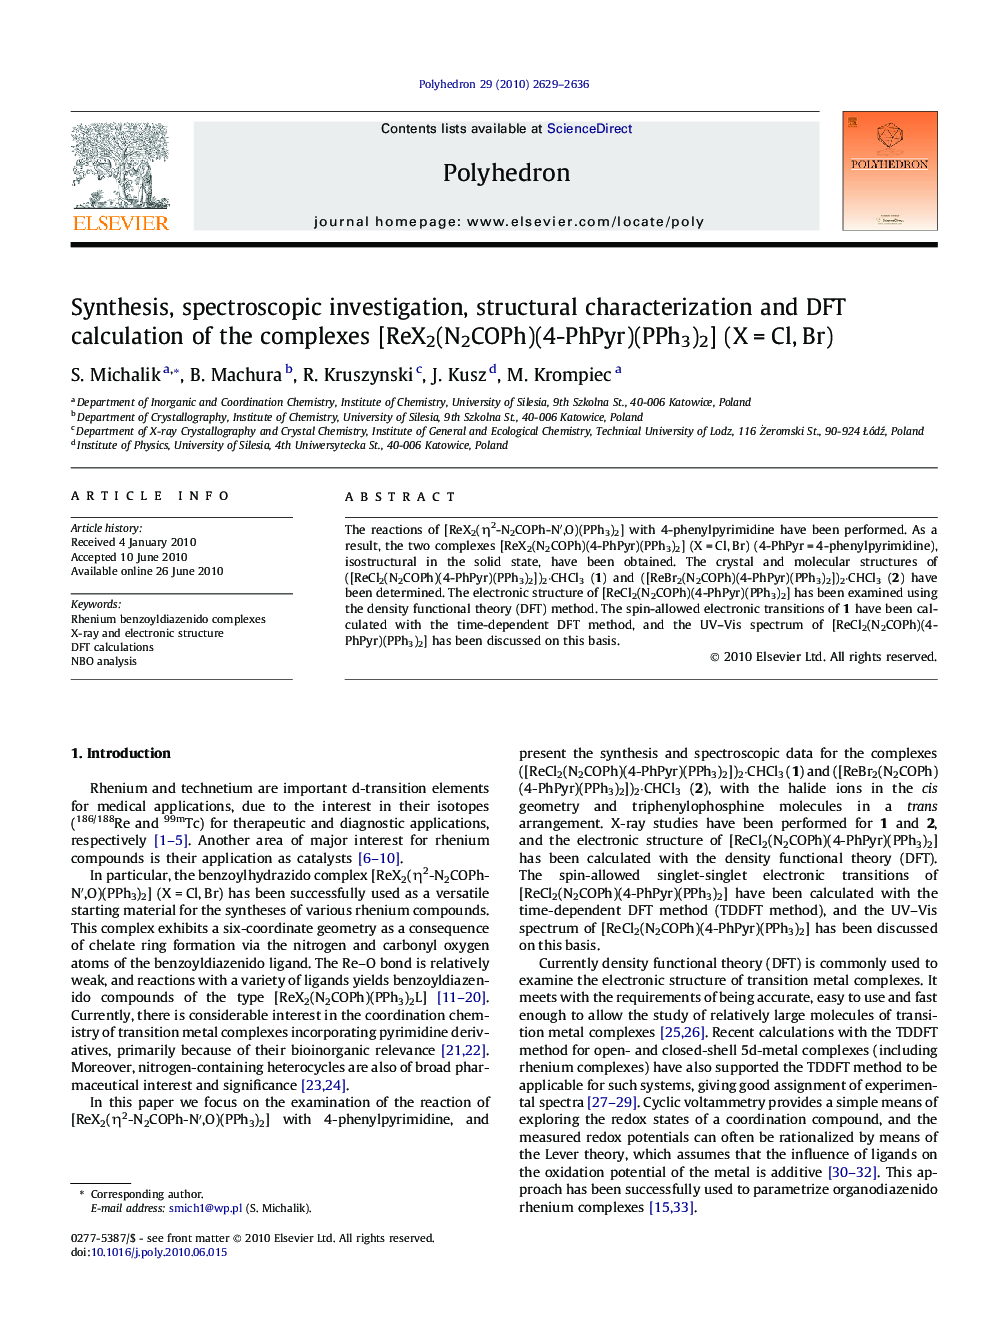 Synthesis, spectroscopic investigation, structural characterization and DFT calculation of the complexes [ReX2(N2COPh)(4-PhPyr)(PPh3)2] (X = Cl, Br)